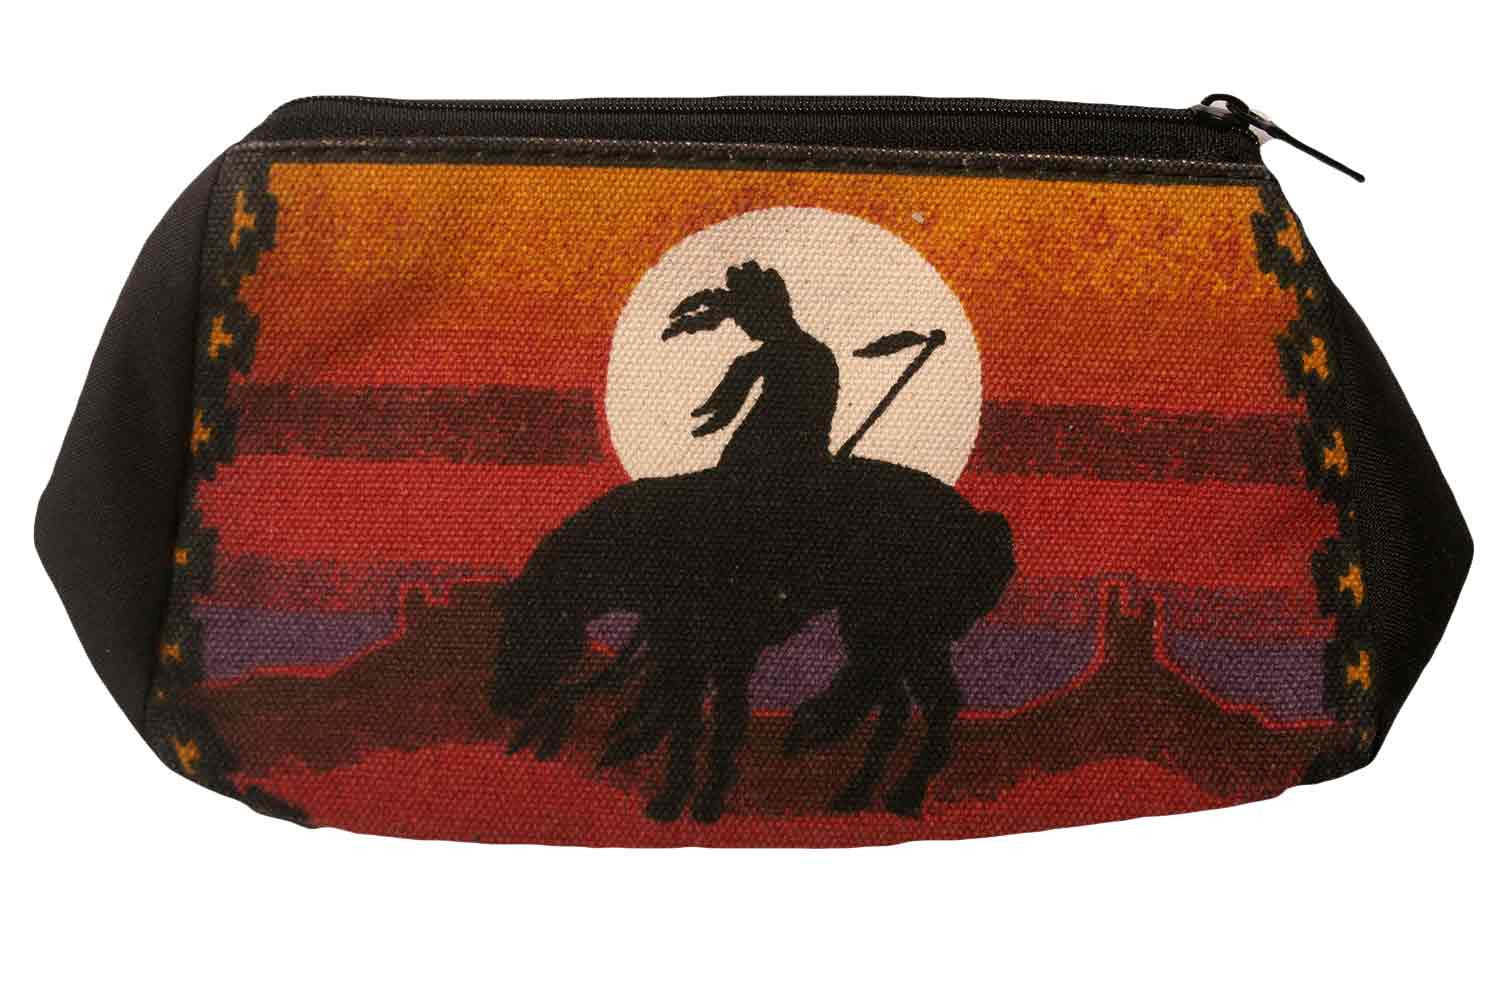 South Western Cosmetic Case